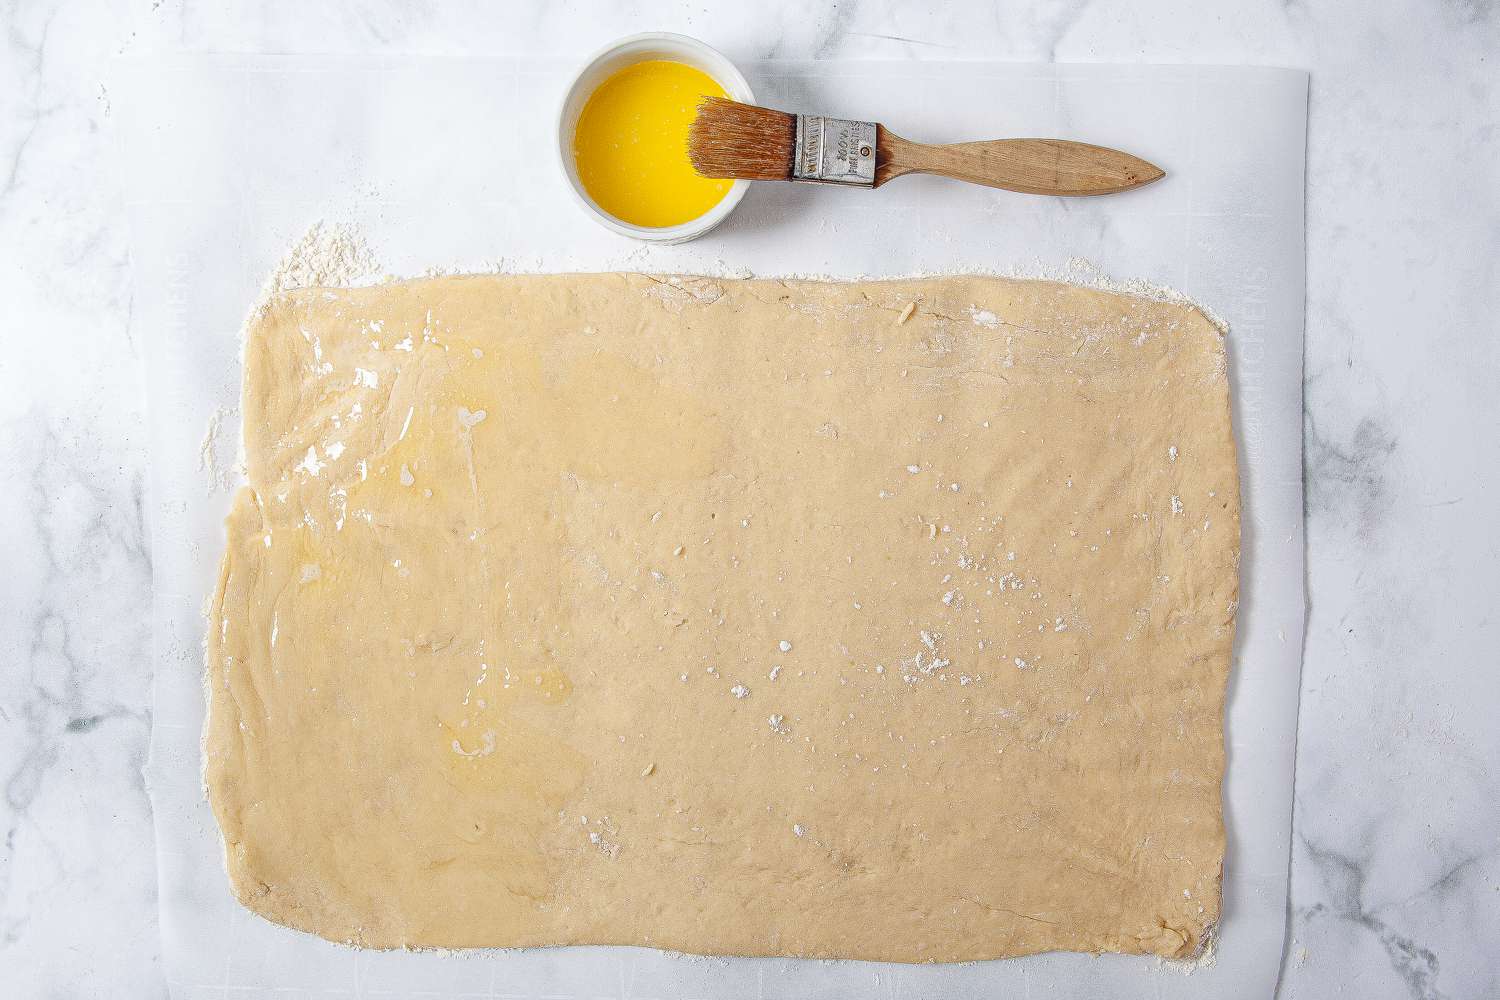 Brush the surface of the dough with melted butter